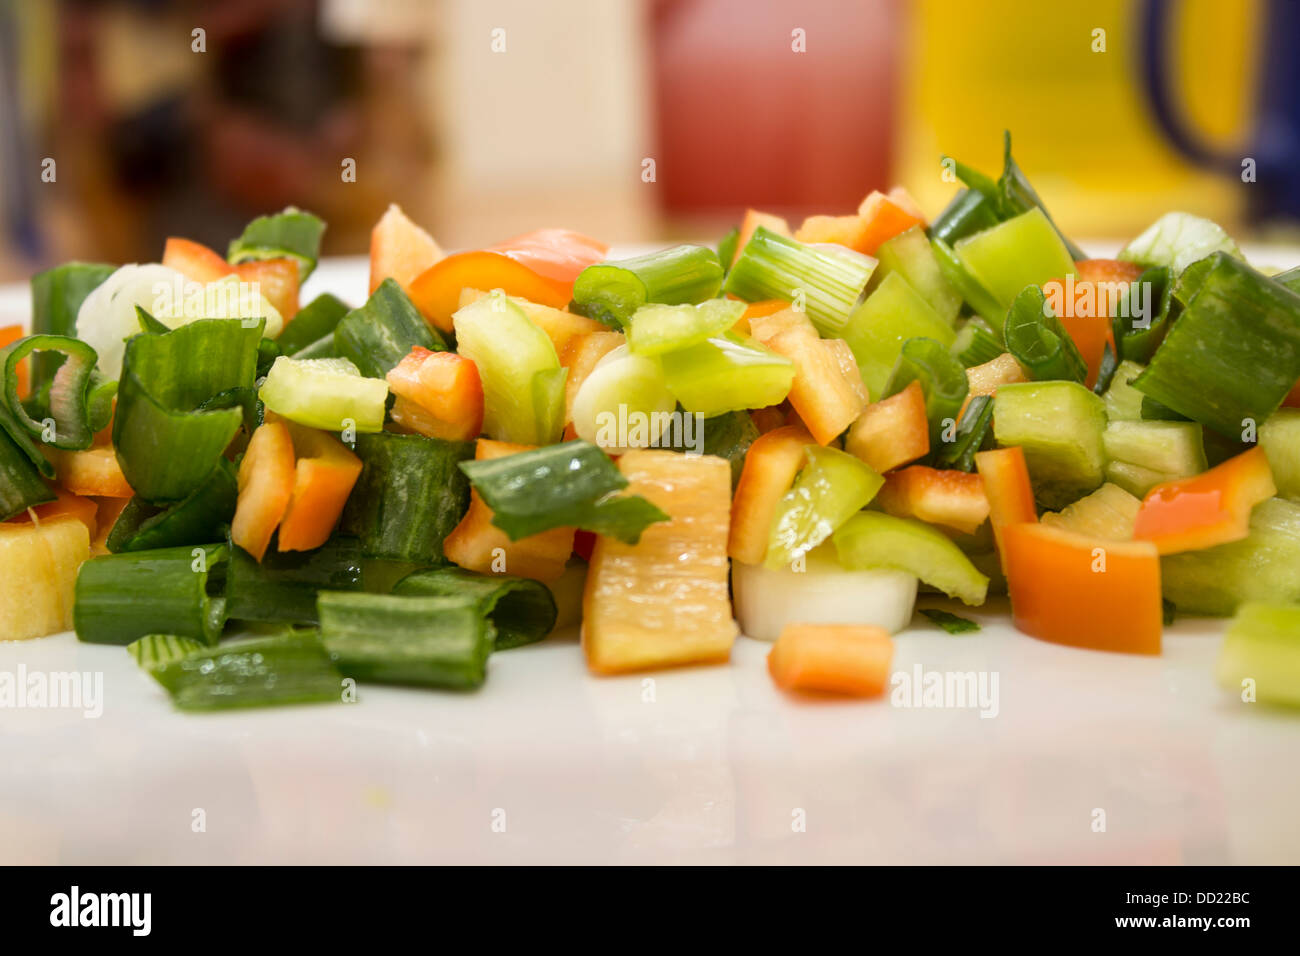 Chopped vegetables in a plate Stock Photo